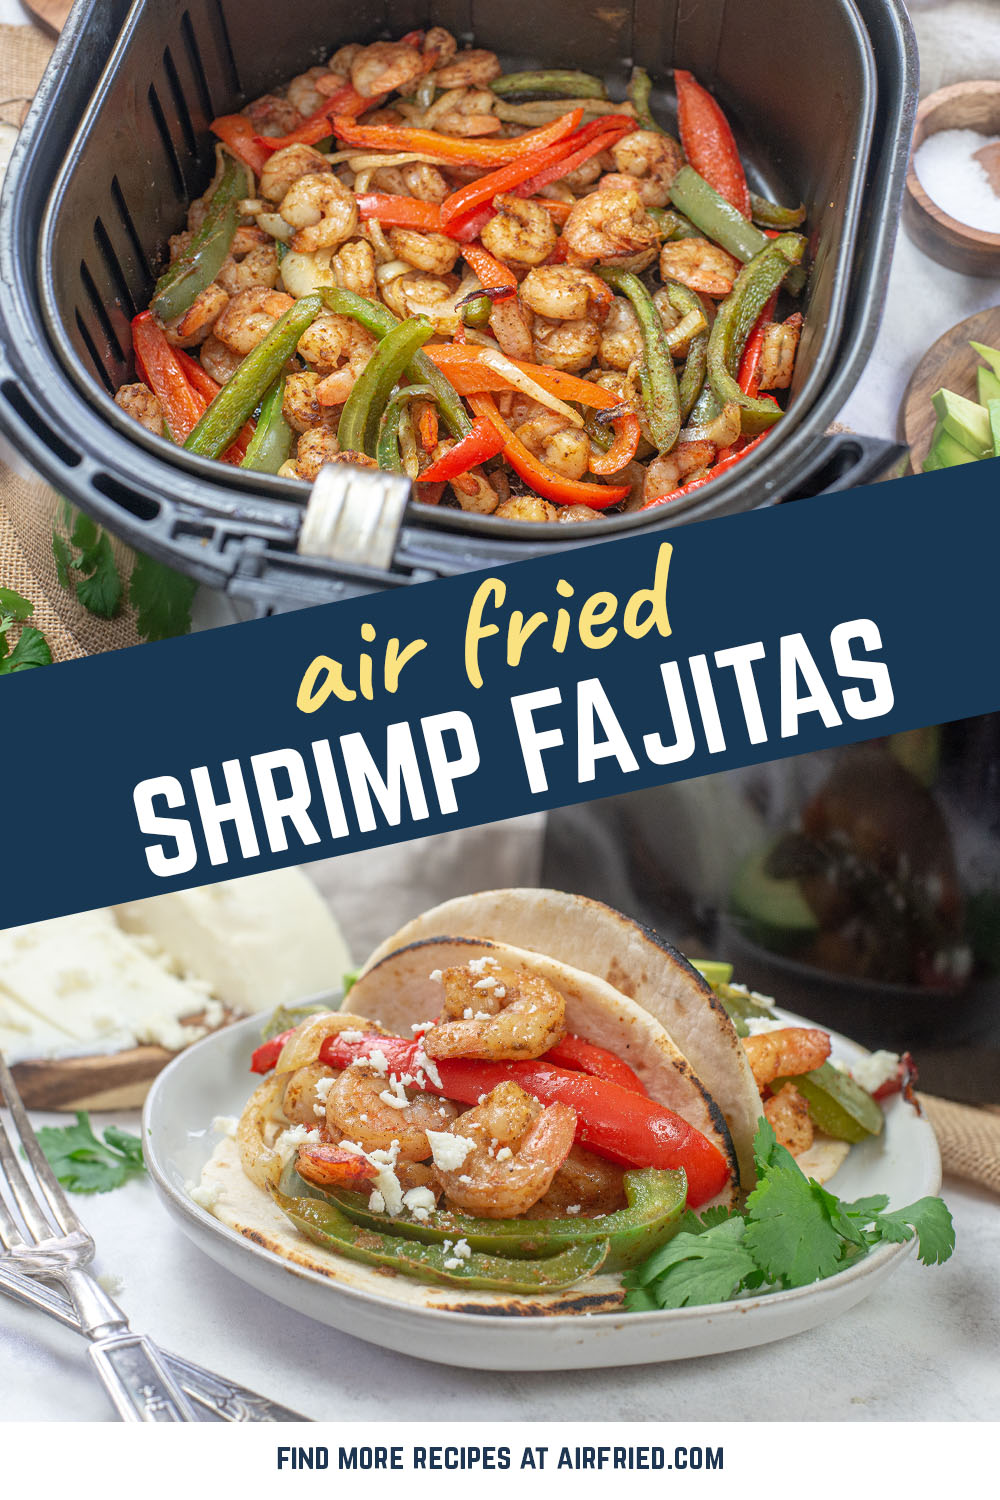 Get lots of flavor with your shrimp by using your air fryer to make shrimp fajitas!